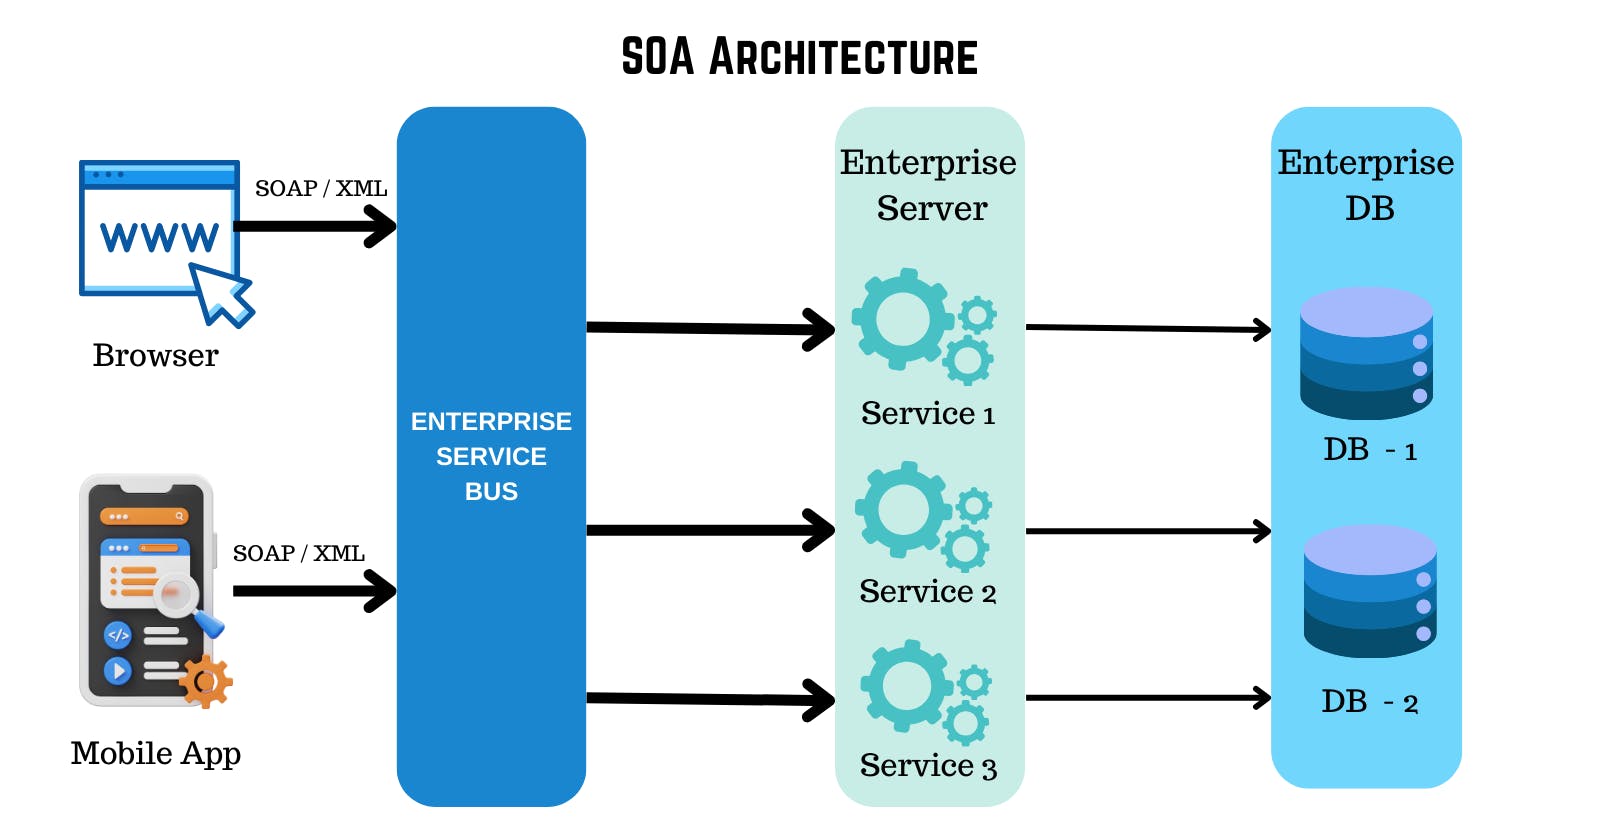 Service Oriented Architecture - A Modular Approach to Software Development